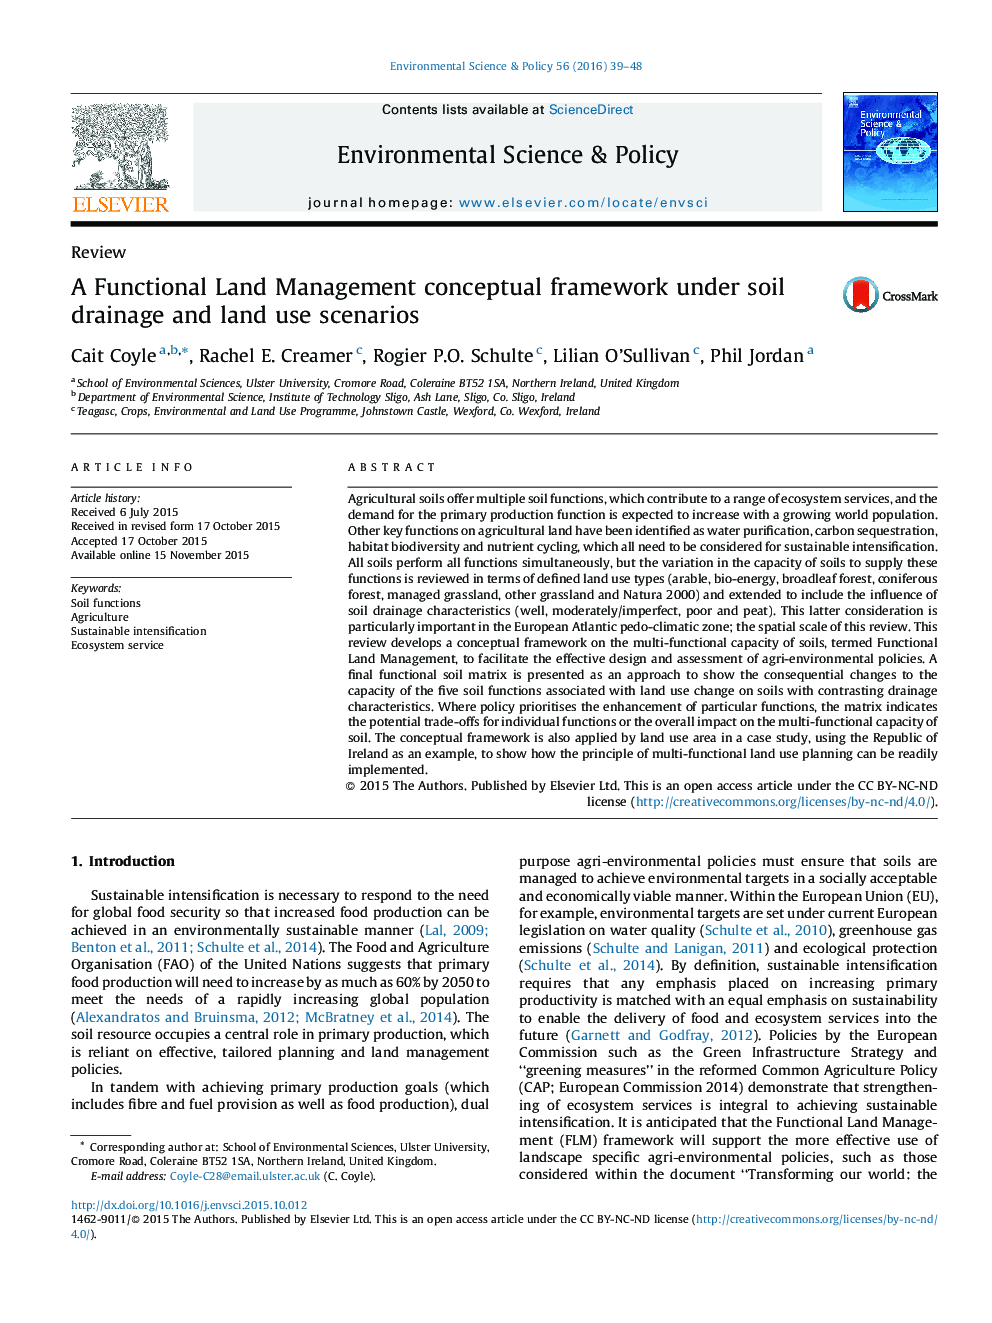 A Functional Land Management conceptual framework under soil drainage and land use scenarios